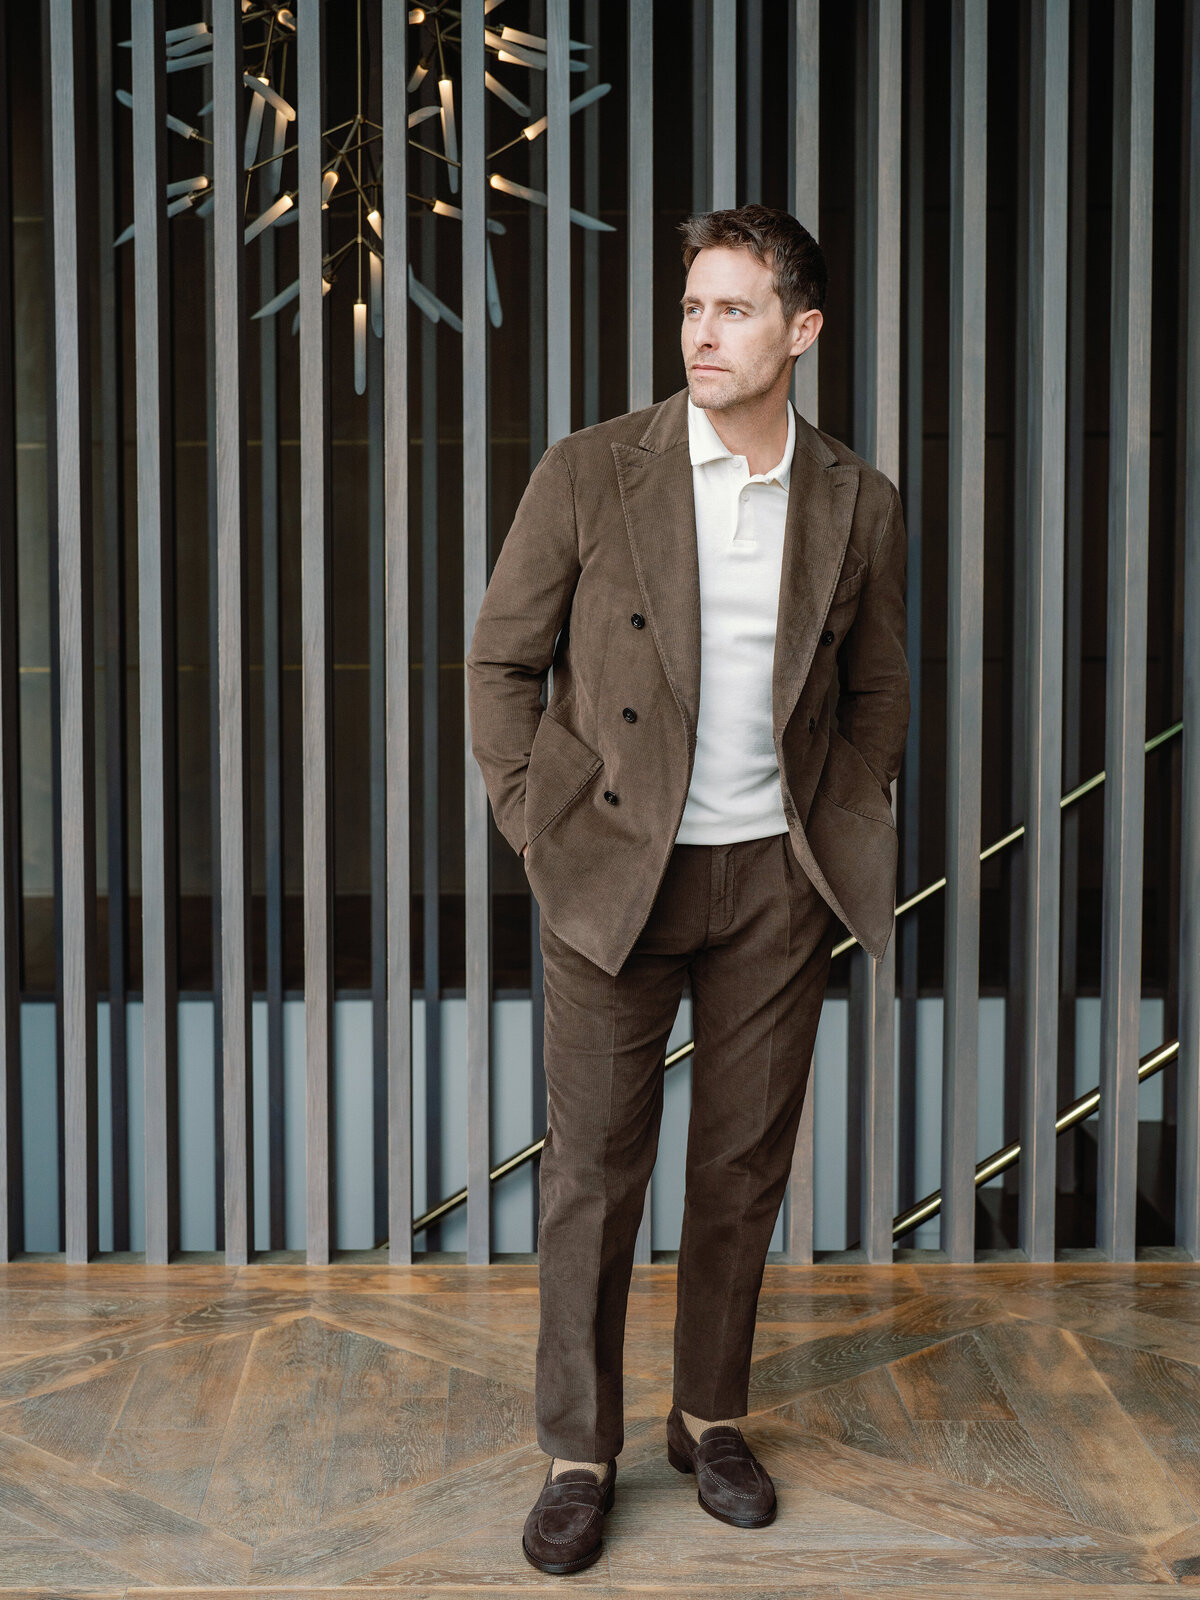 men’s-style-classic-fashion-brown-suit-personal-shopping-fashion-stylist-raina-silberstein